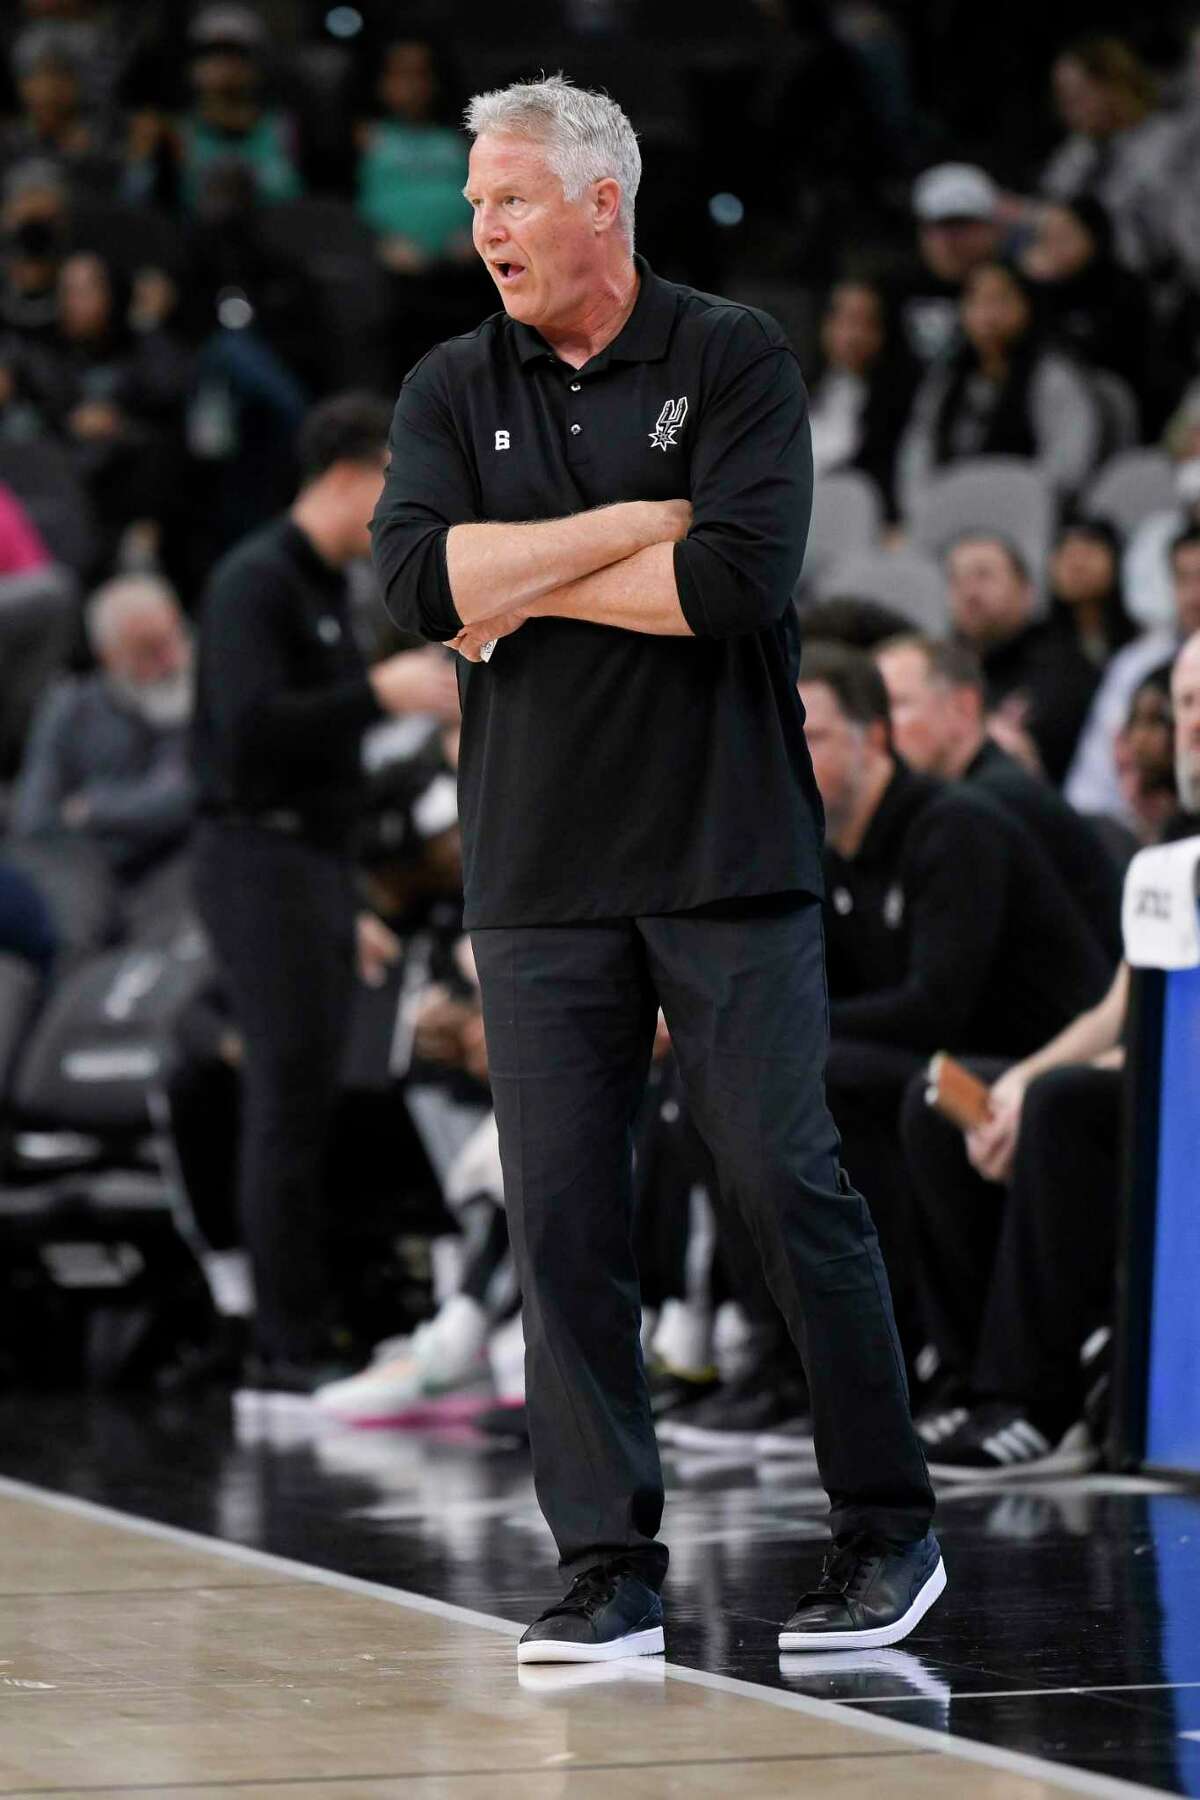 San Antonio Spurs assistant coach Brett Brown yells to his players during the first half of an NBA basketball game against the New Orleans Pelicans, Friday, Dec. 2, 2022, in San Antonio. (AP Photo/Darren Abate)